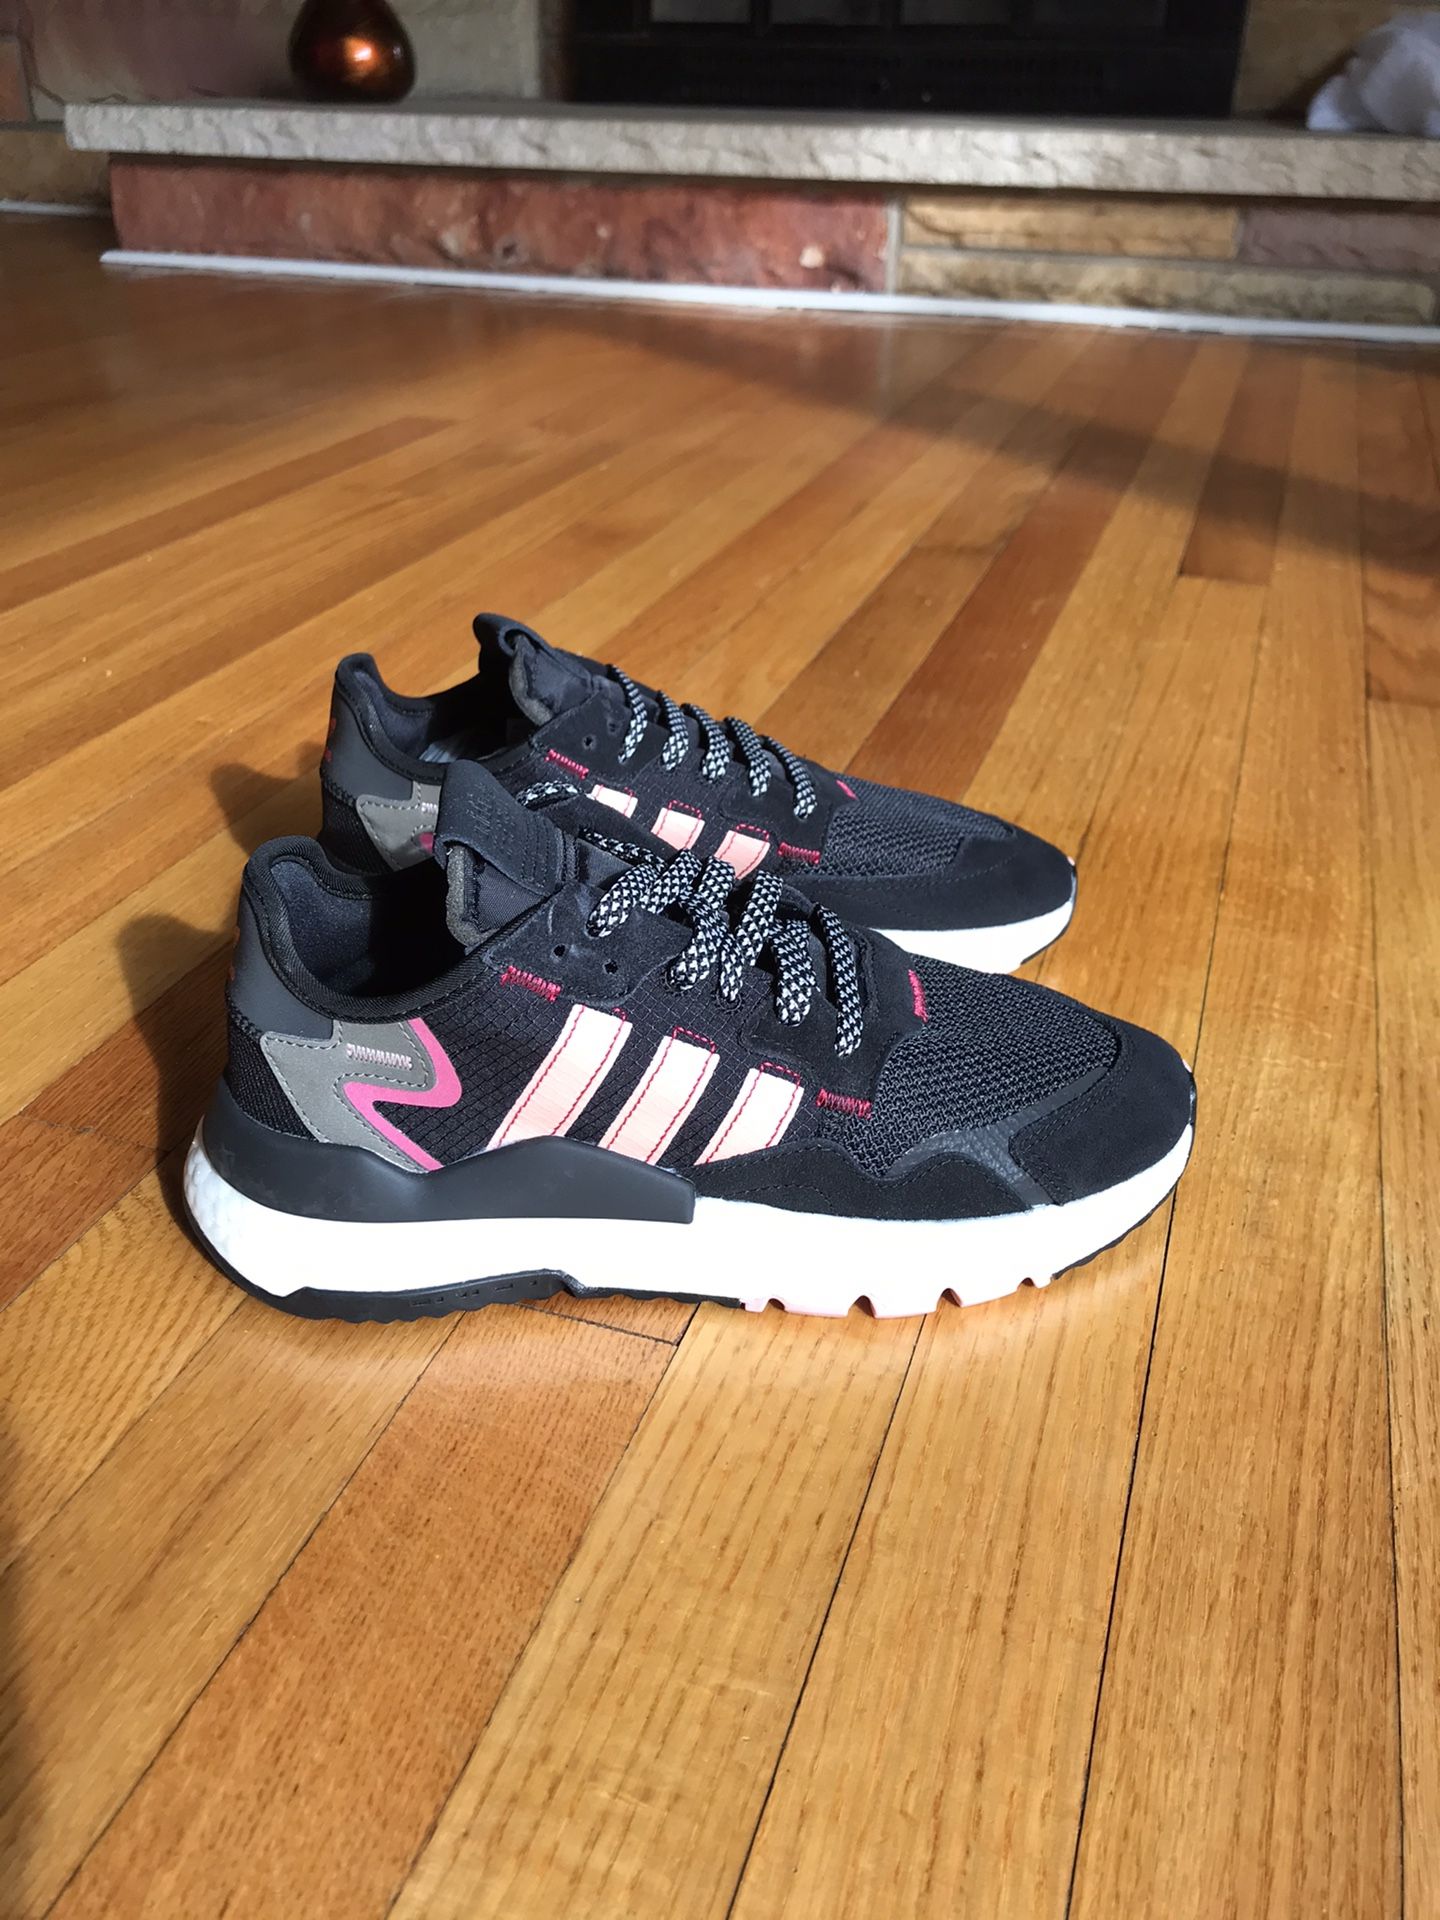 Adidas Nite Jogger Boost EG9231 Women's Size 9 Black/Pink New without box